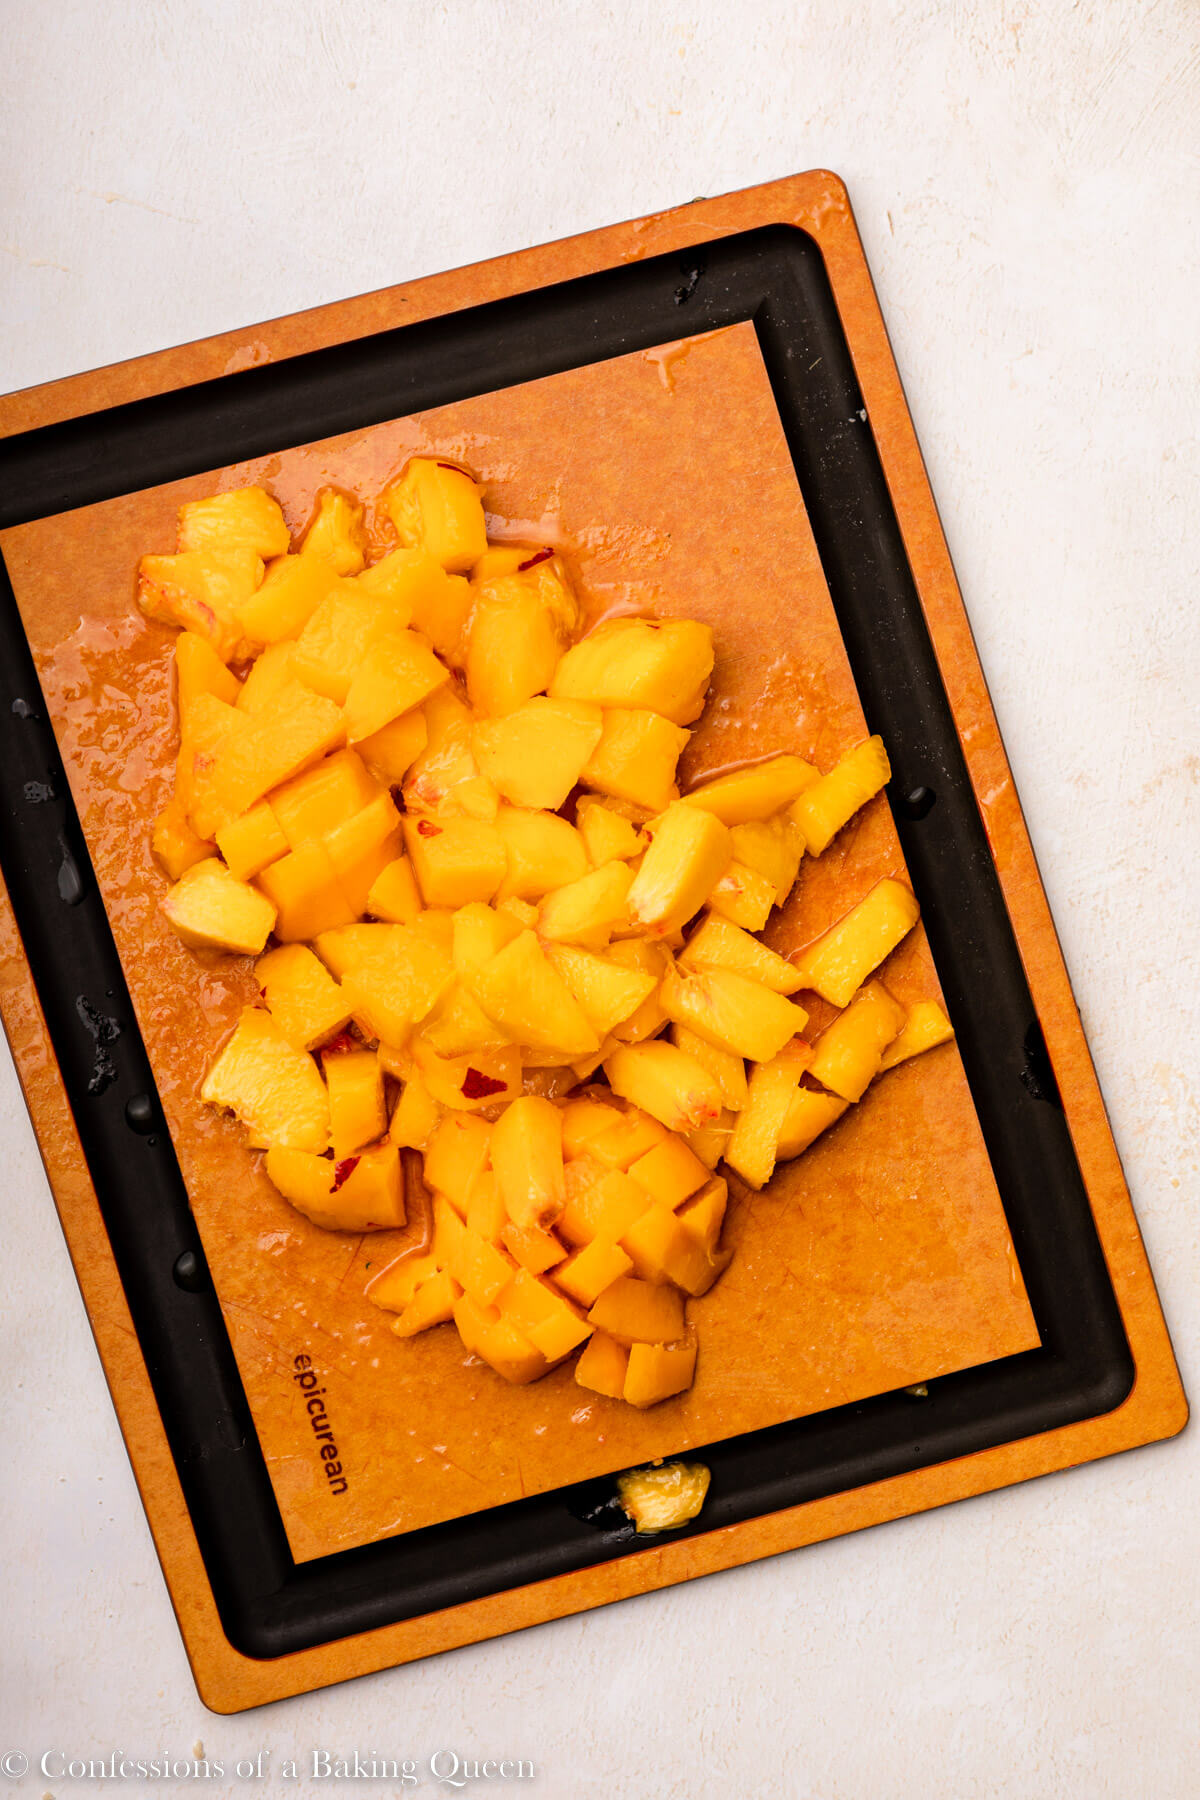 peaches cut up on a cutting board on a light surface